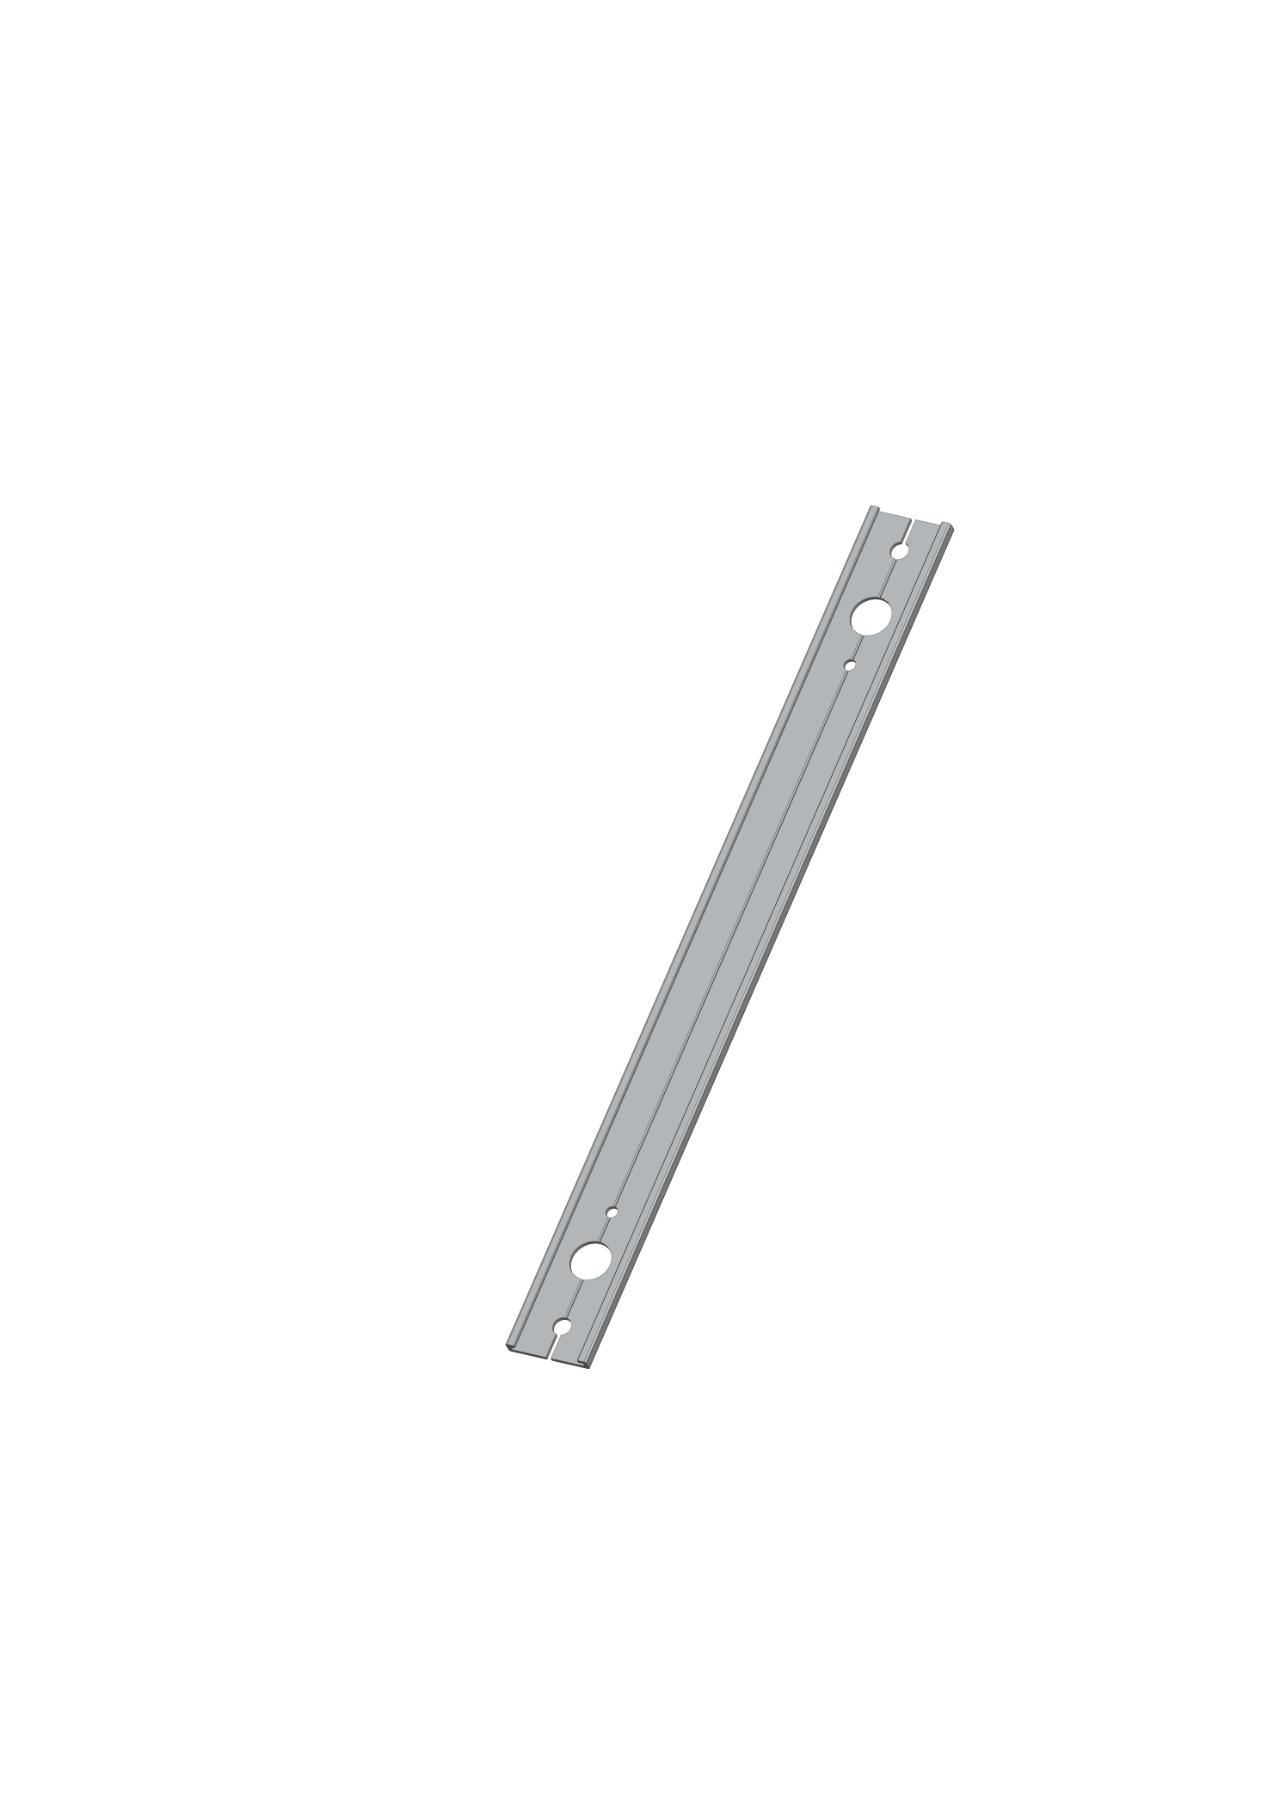 Brackets for Tarifold Pro Wall Document Display Systems